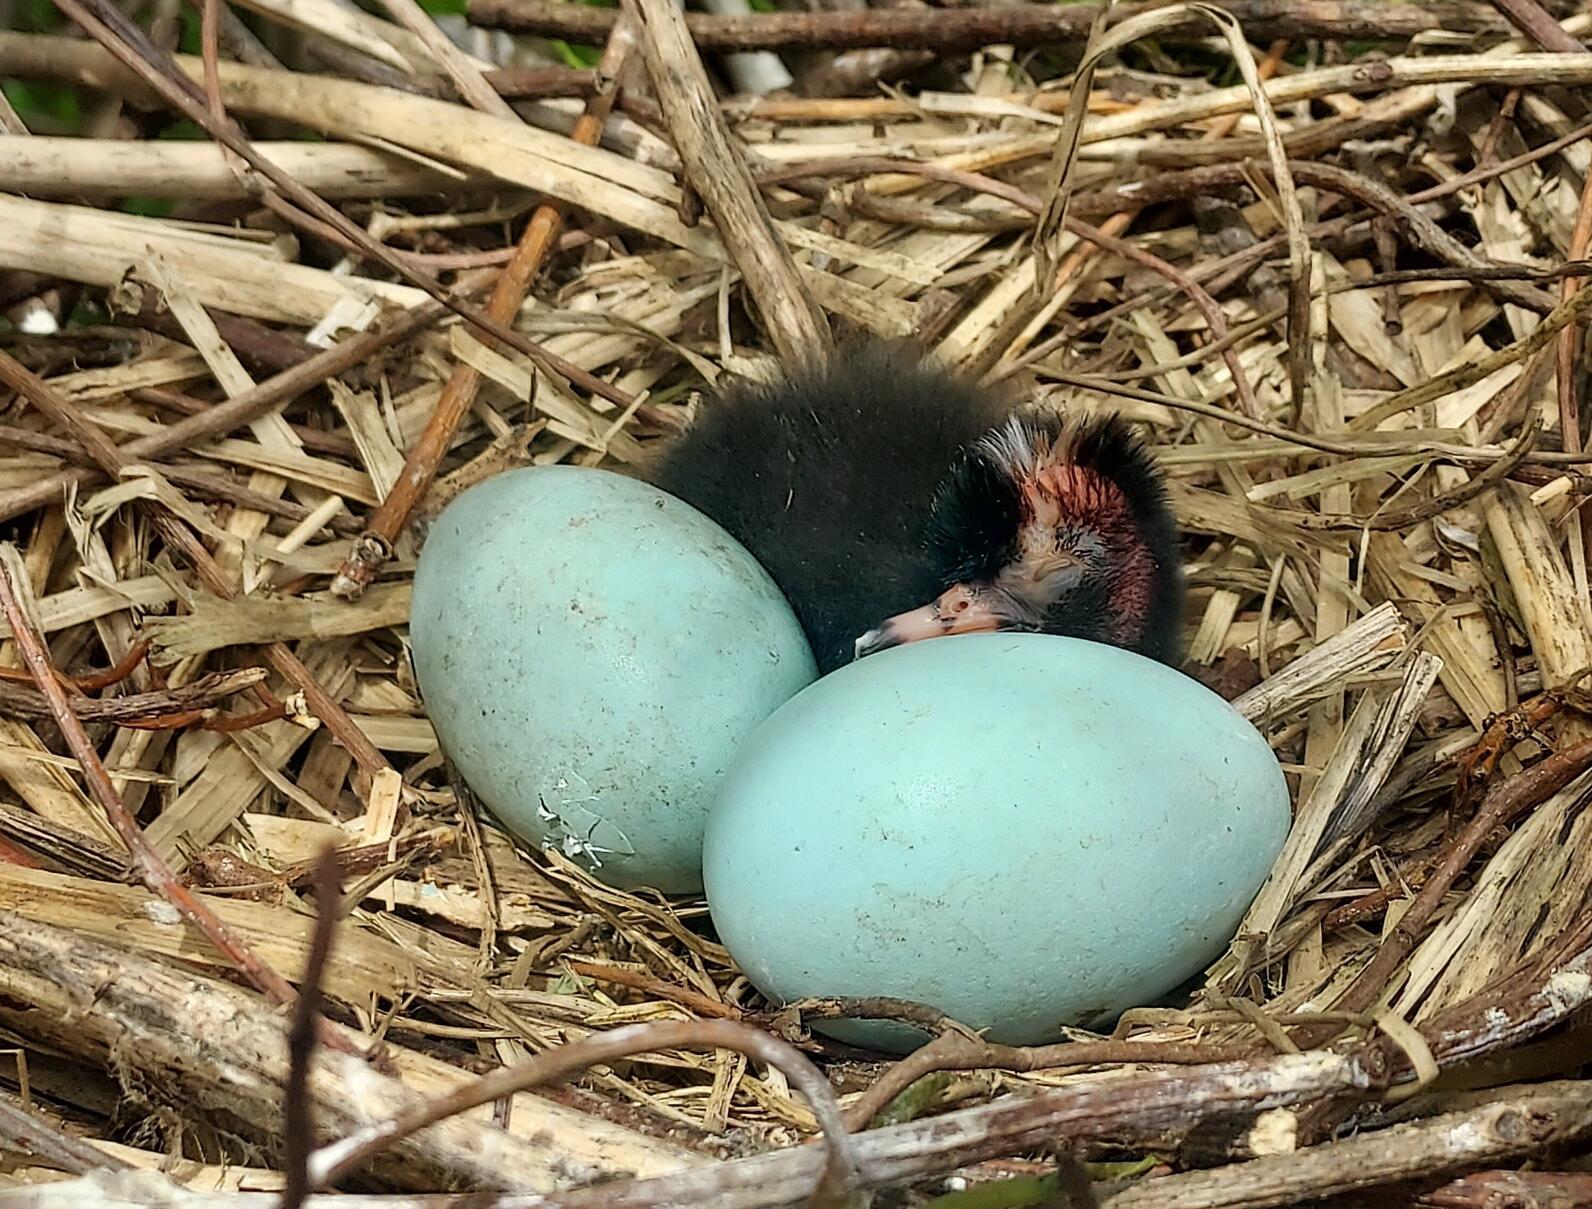 Glossy Ibis chick in nest with soon-to-be siblings in eggs